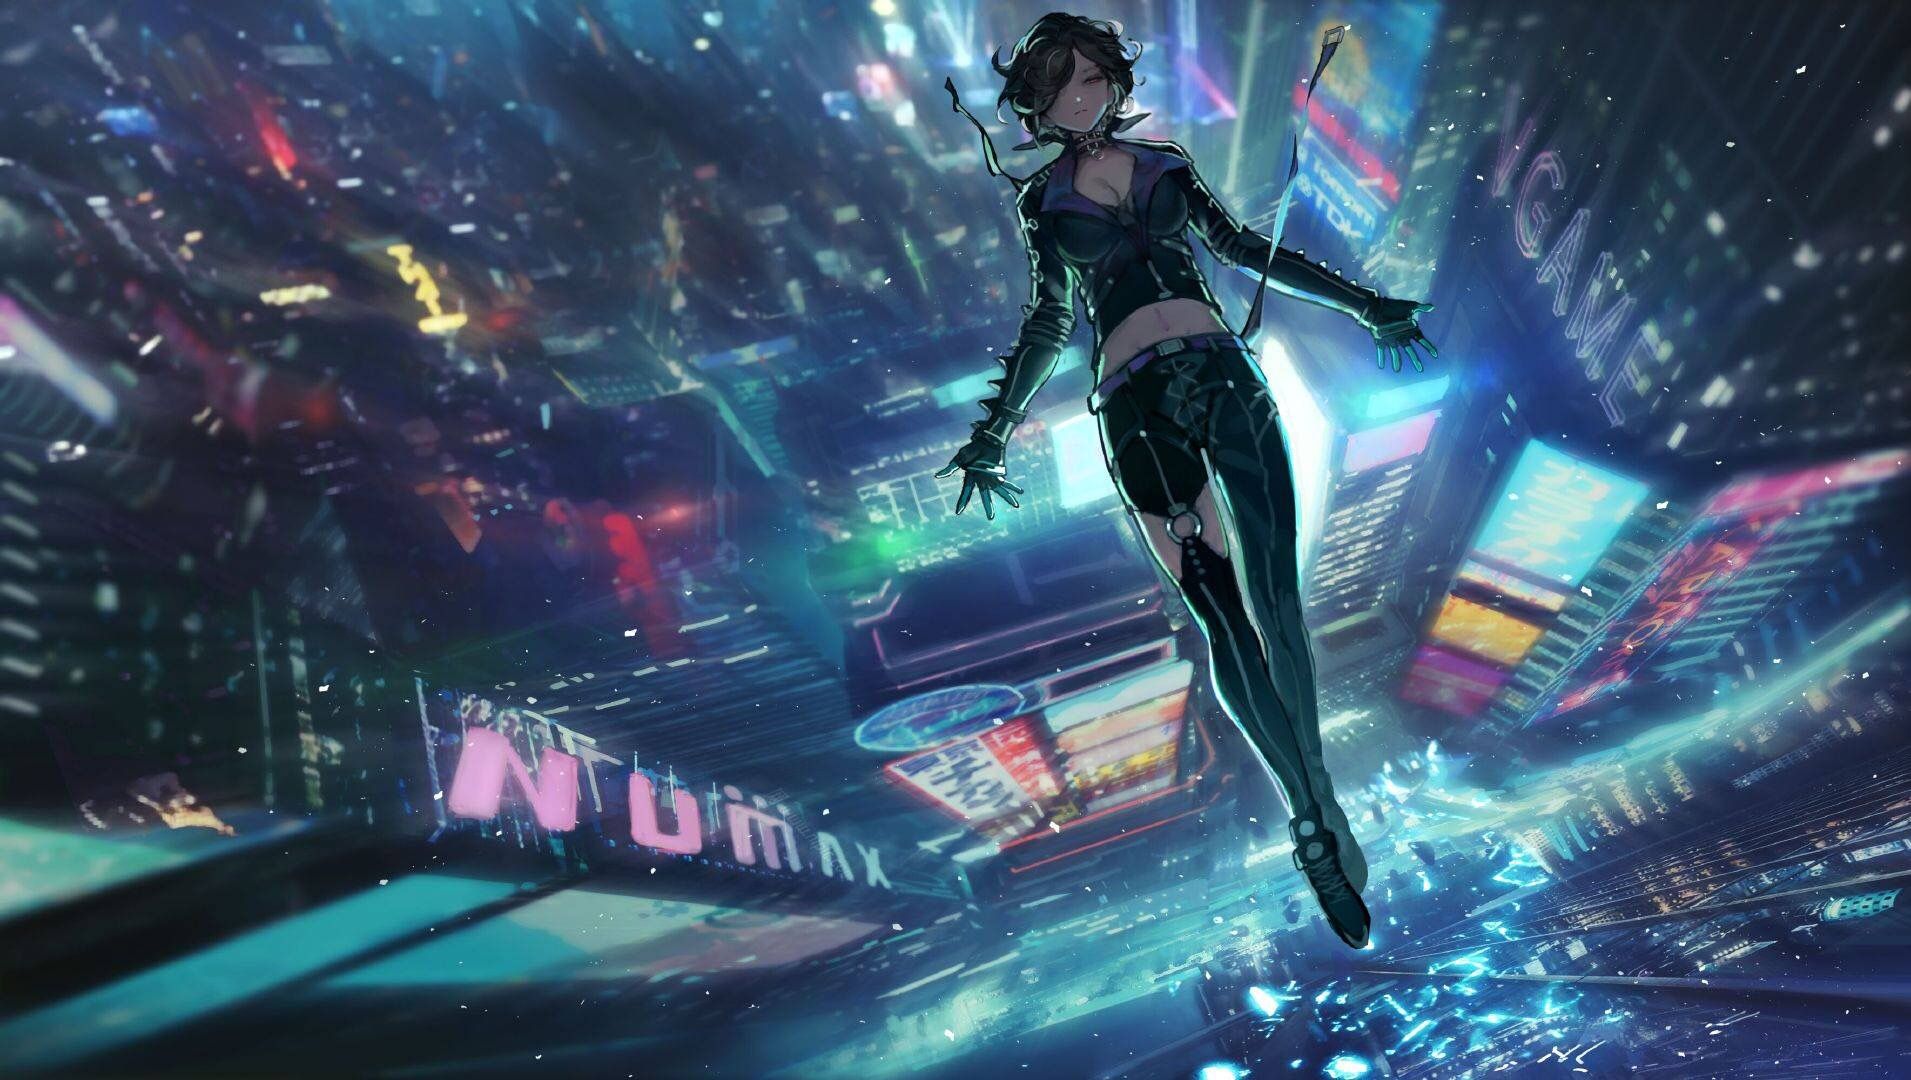 Cyber City Anime Wallpapers Wallpaper Cave 7310